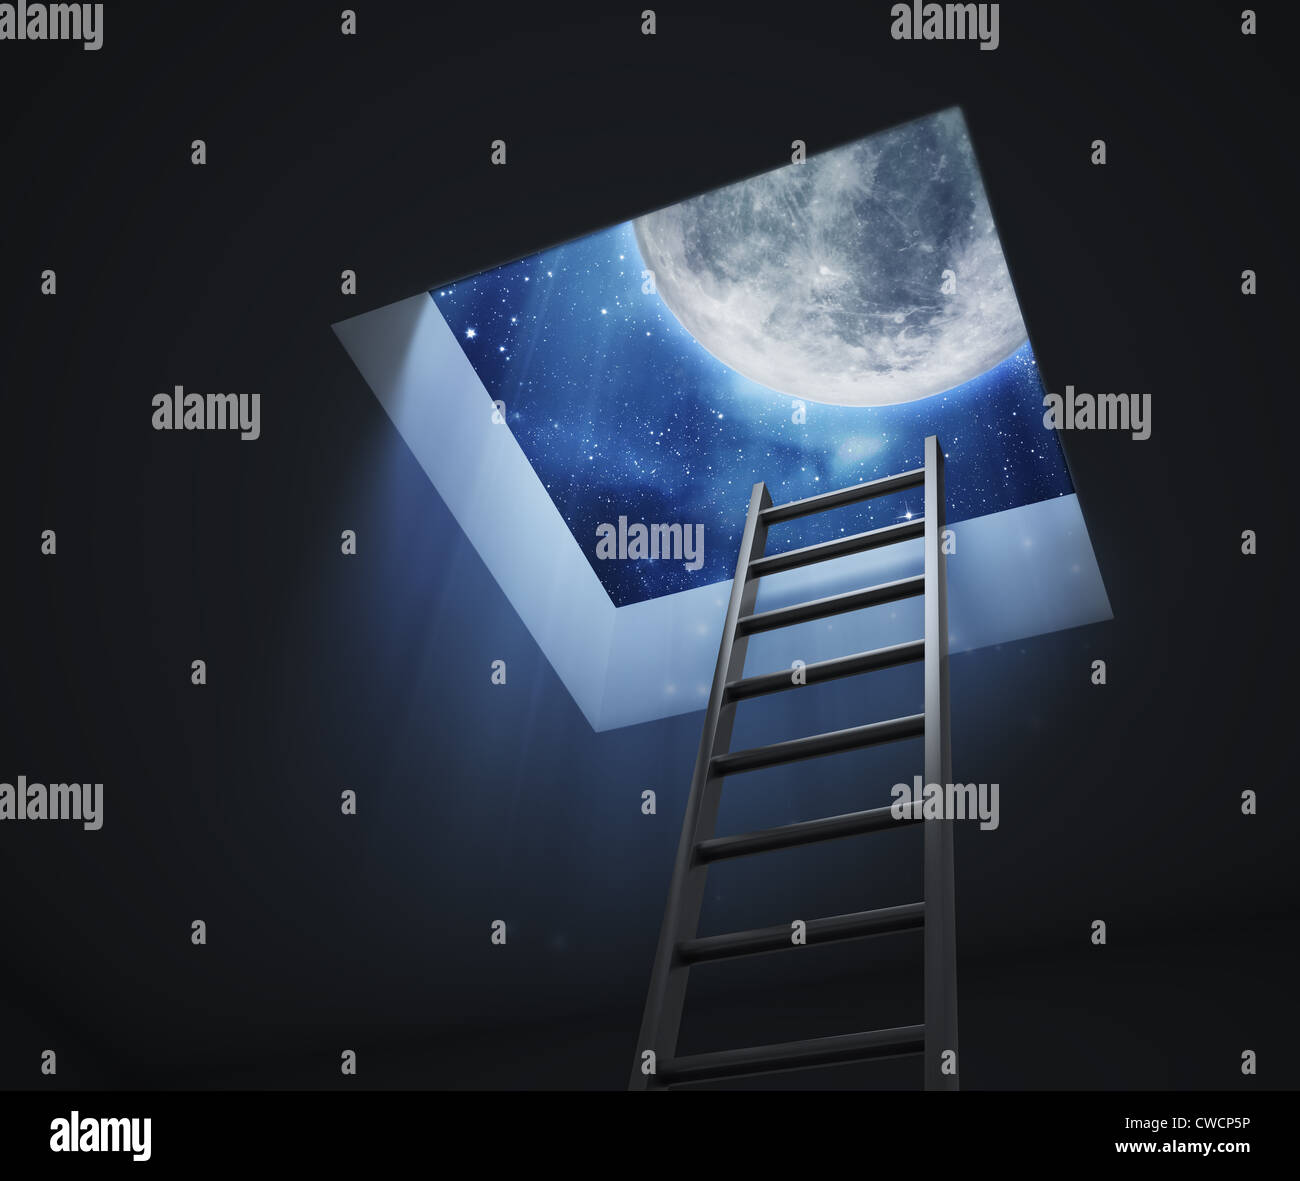 A ladder leading to an opening with visible night sky with the Moon and stars Stock Photo